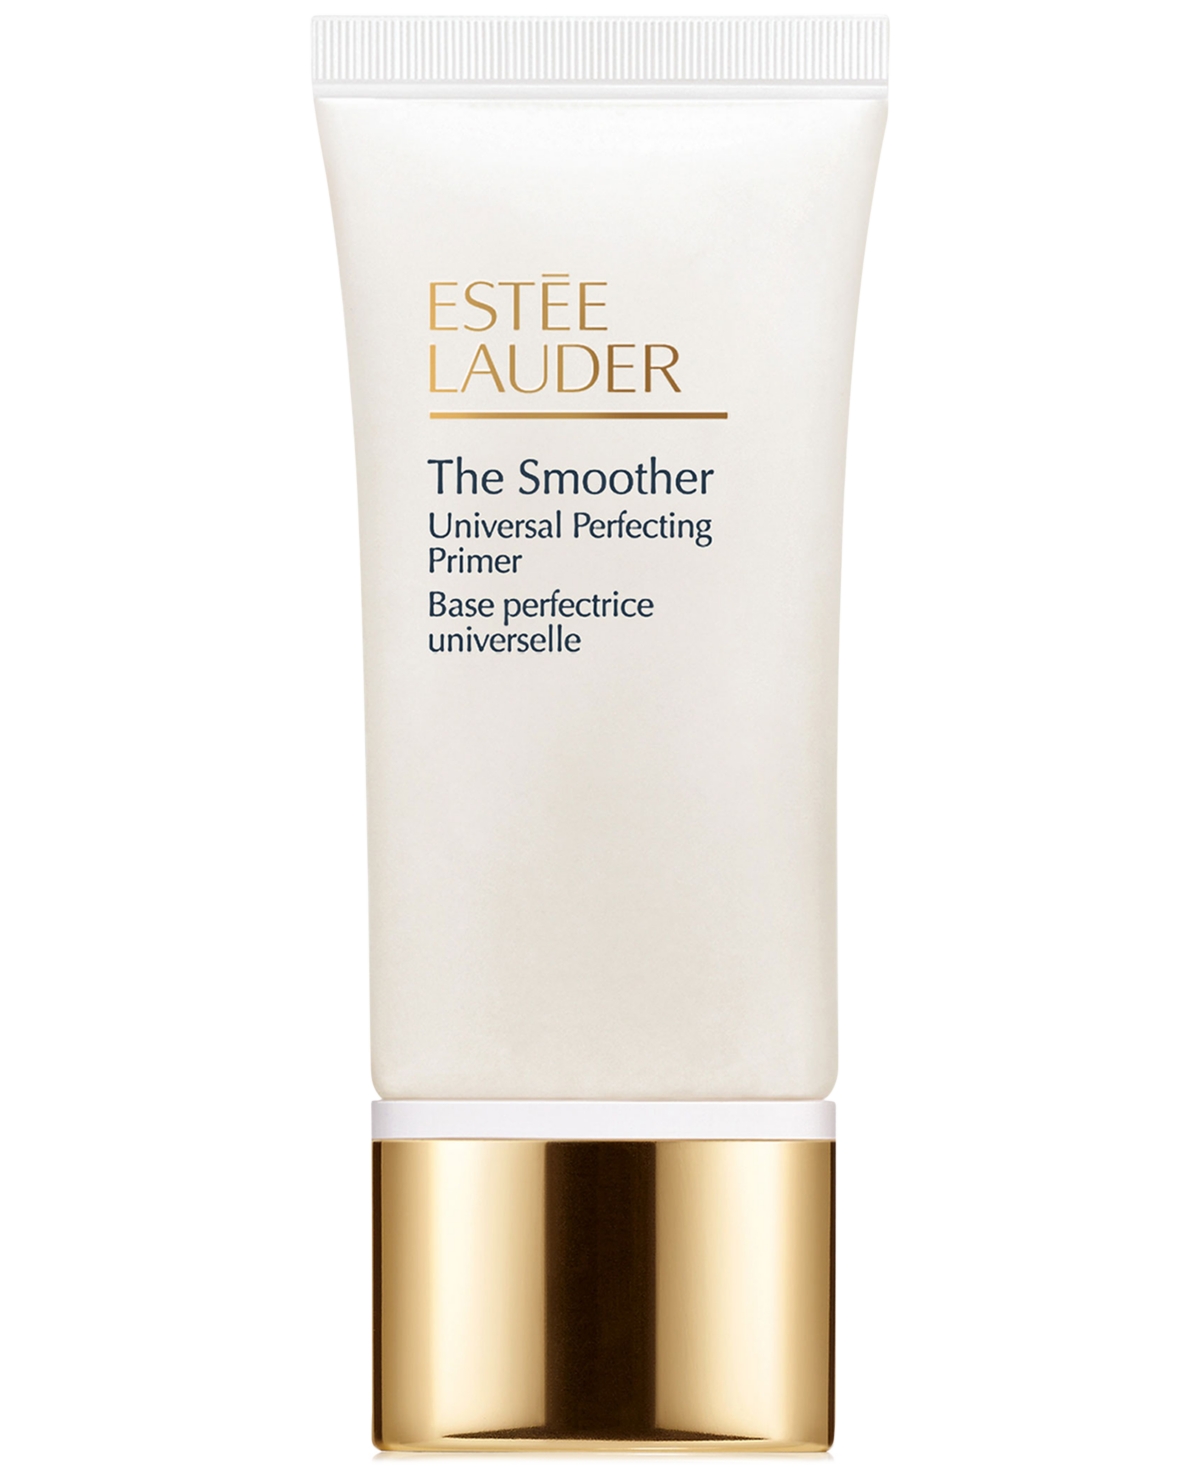 Estée Lauder The Smoother Universal Perfecting Primer, 1 Oz. In Clear